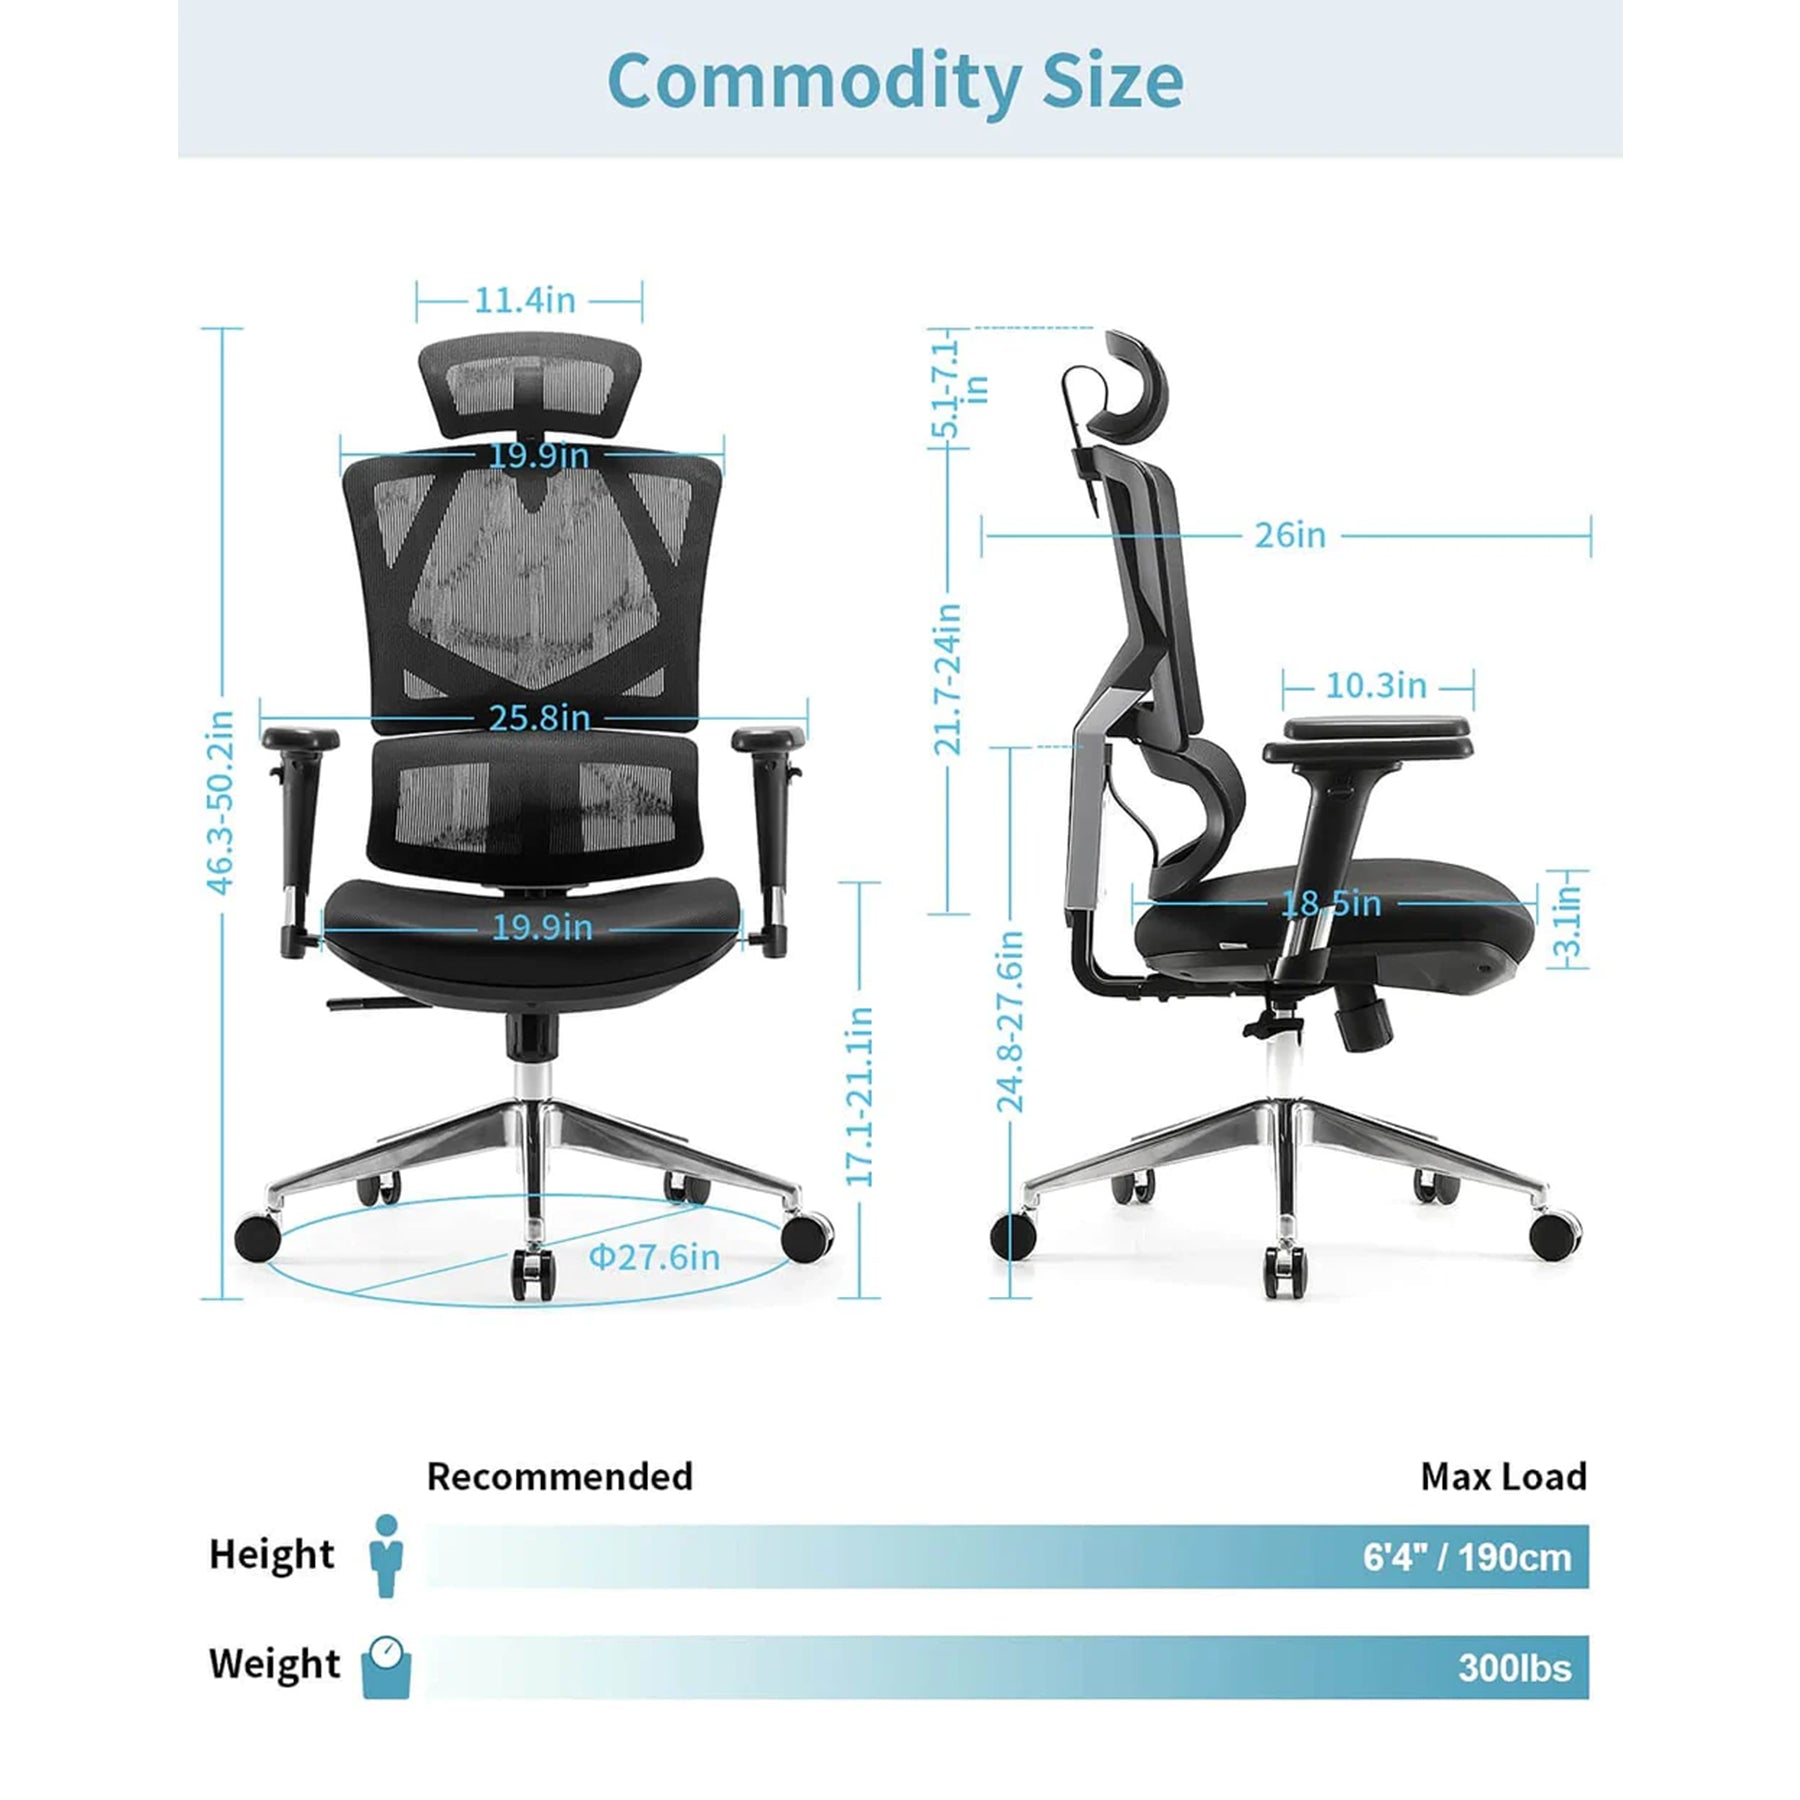 Sihoo M90D Ergnonomic Office Chair with Dynamic Lumbar Support